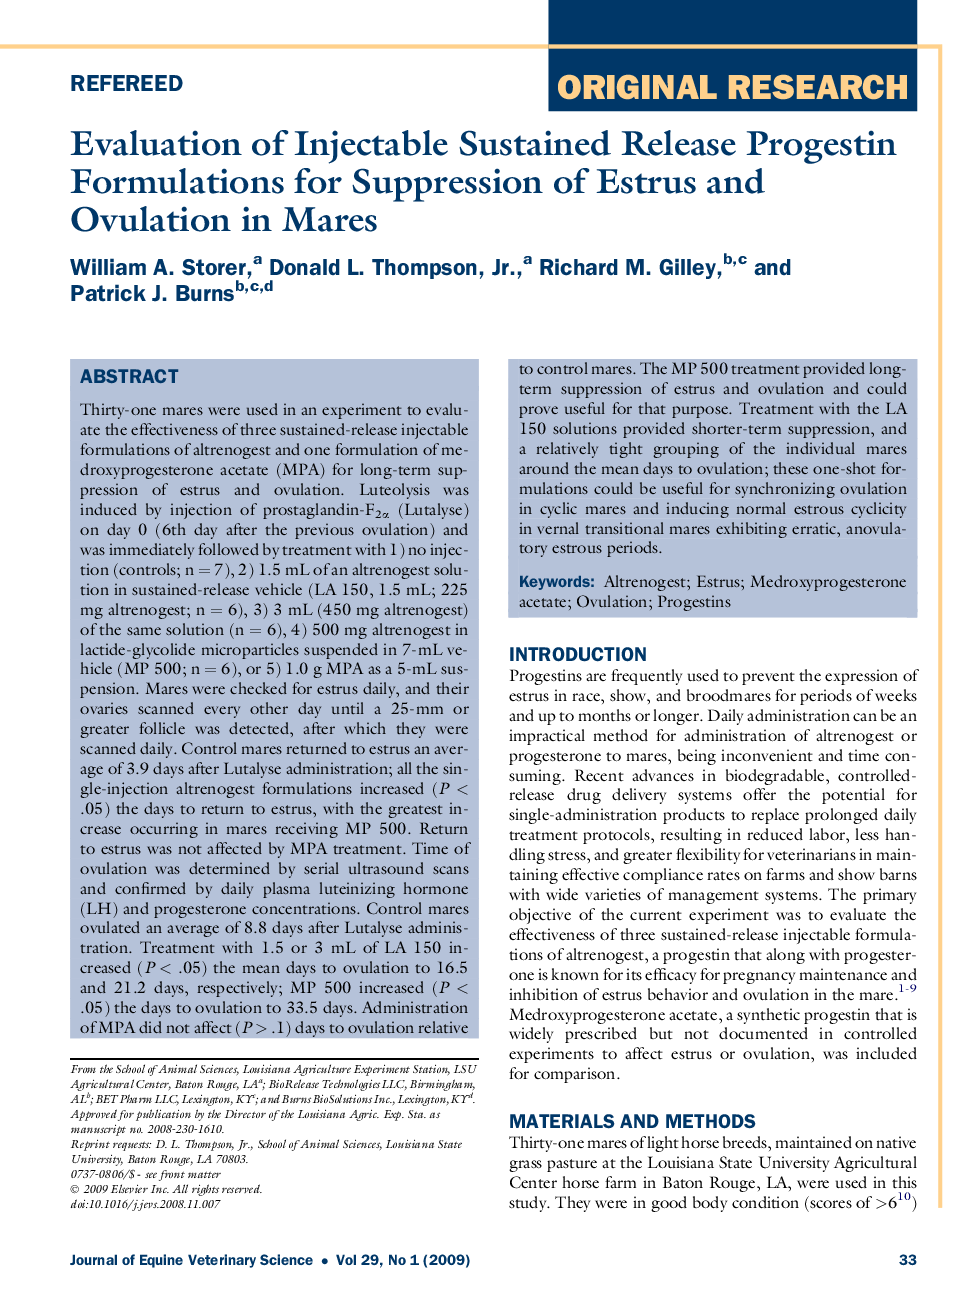 Evaluation of Injectable Sustained Release Progestin Formulations for Suppression of Estrus and Ovulation in Mares 